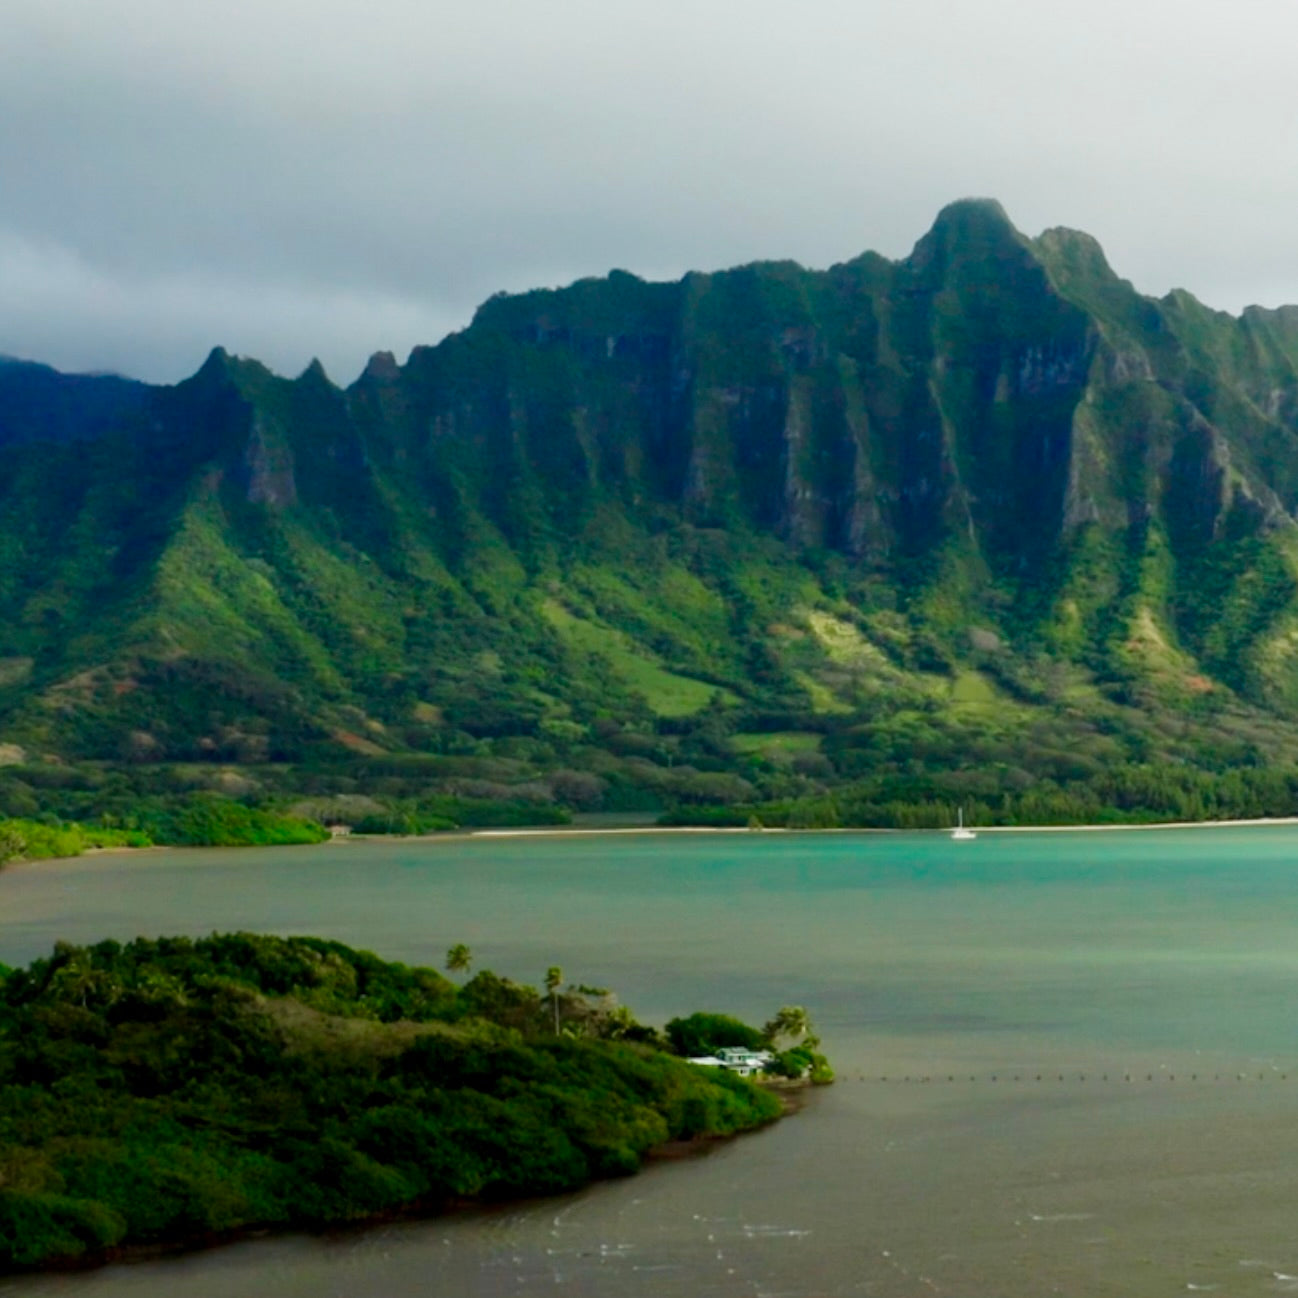 Image of mountains on the windward side of Oahu